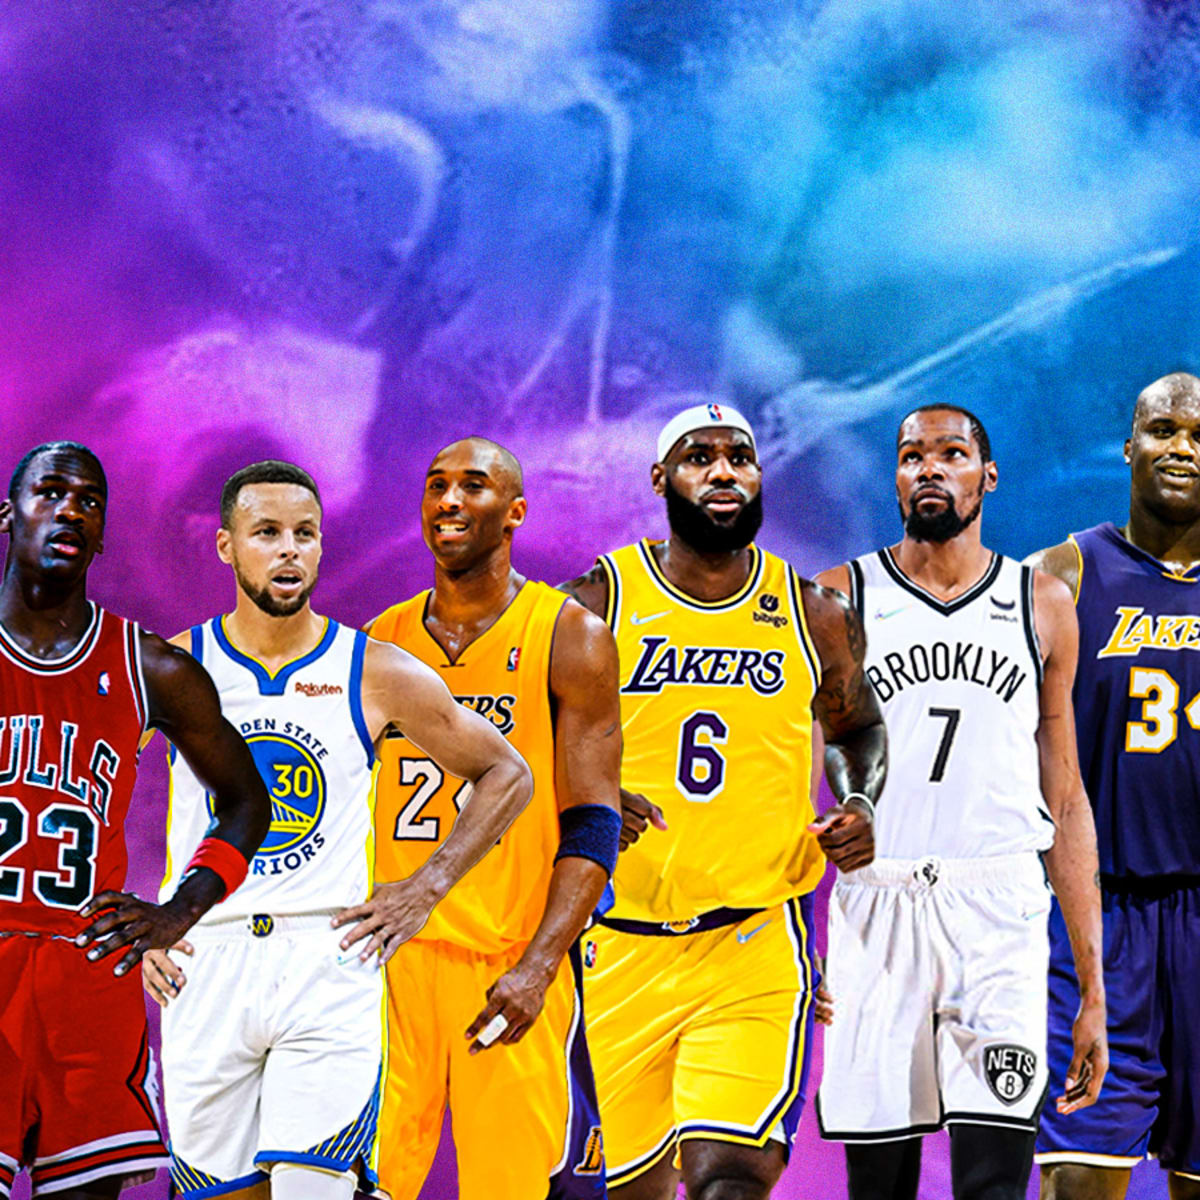 NBA Fans Debate Which Player Would Go To The Bench If Everybody Was On The  Same Team: Michael Jordan, Stephen Curry, Kobe Bryant, LeBron James, Kevin  Durant Or Shaquille O'Neal - Fadeaway